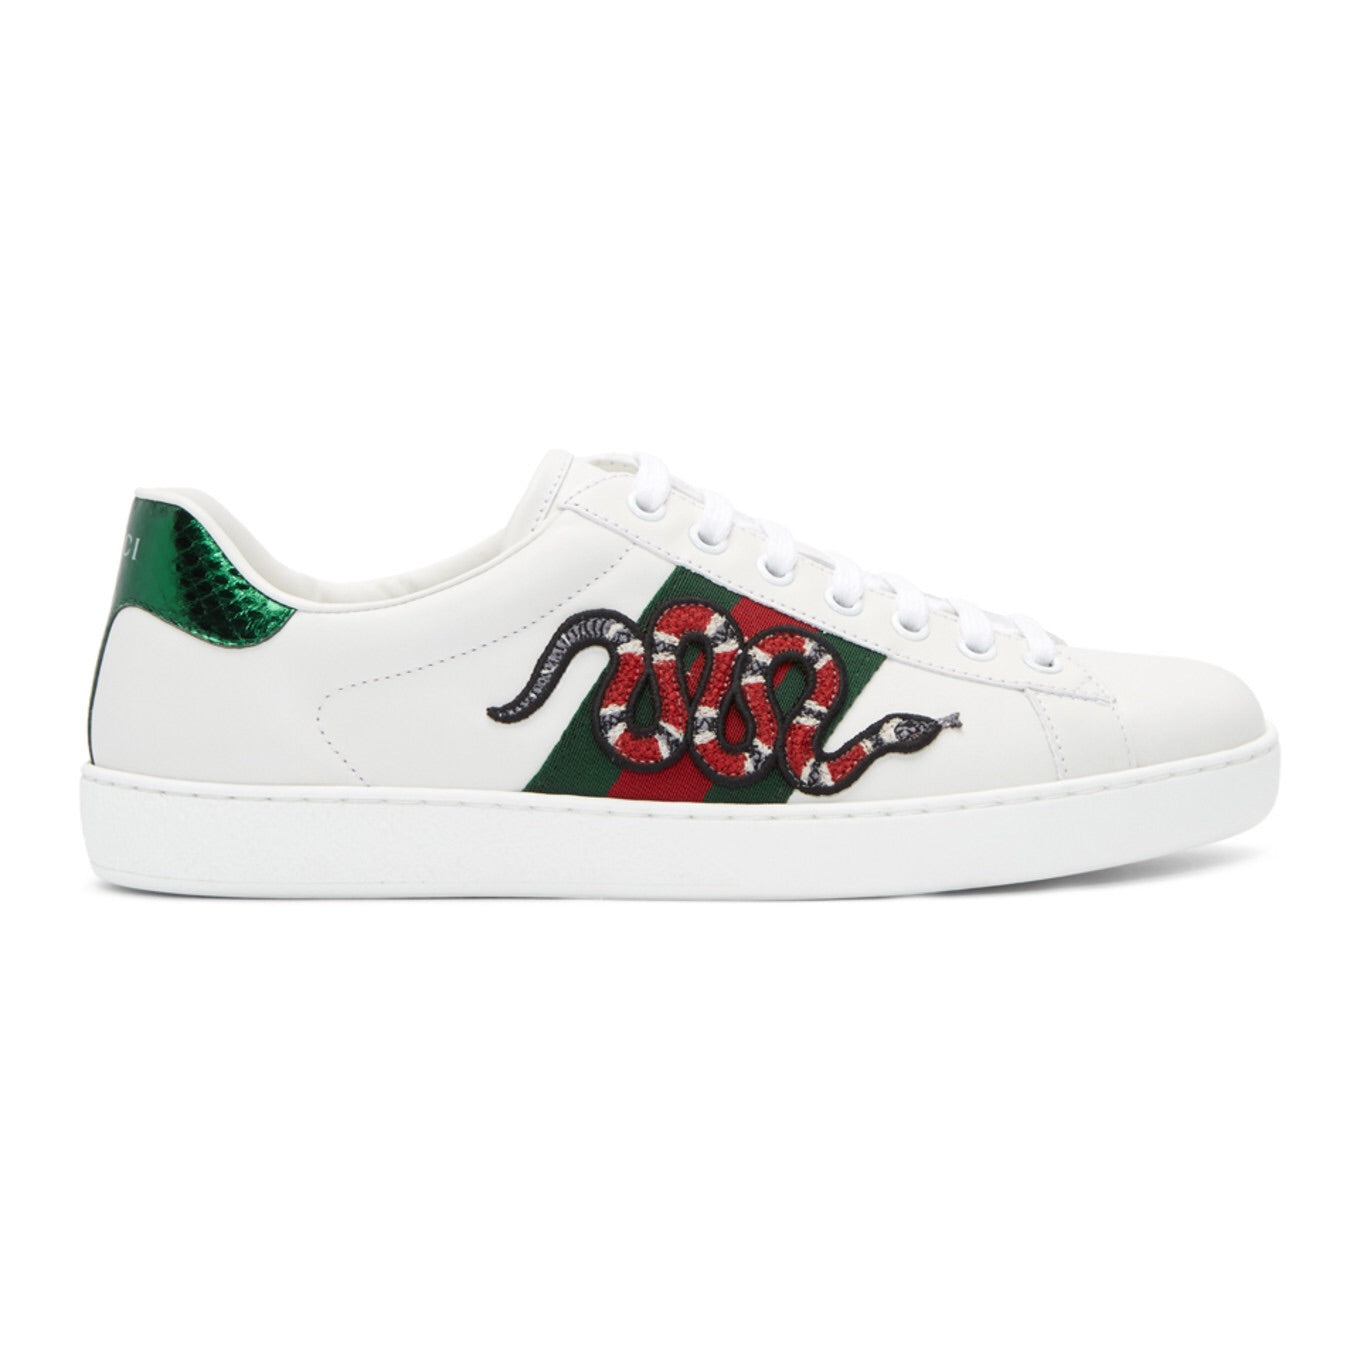 Gucci ace sneaker low top “snake” - Centrall Online